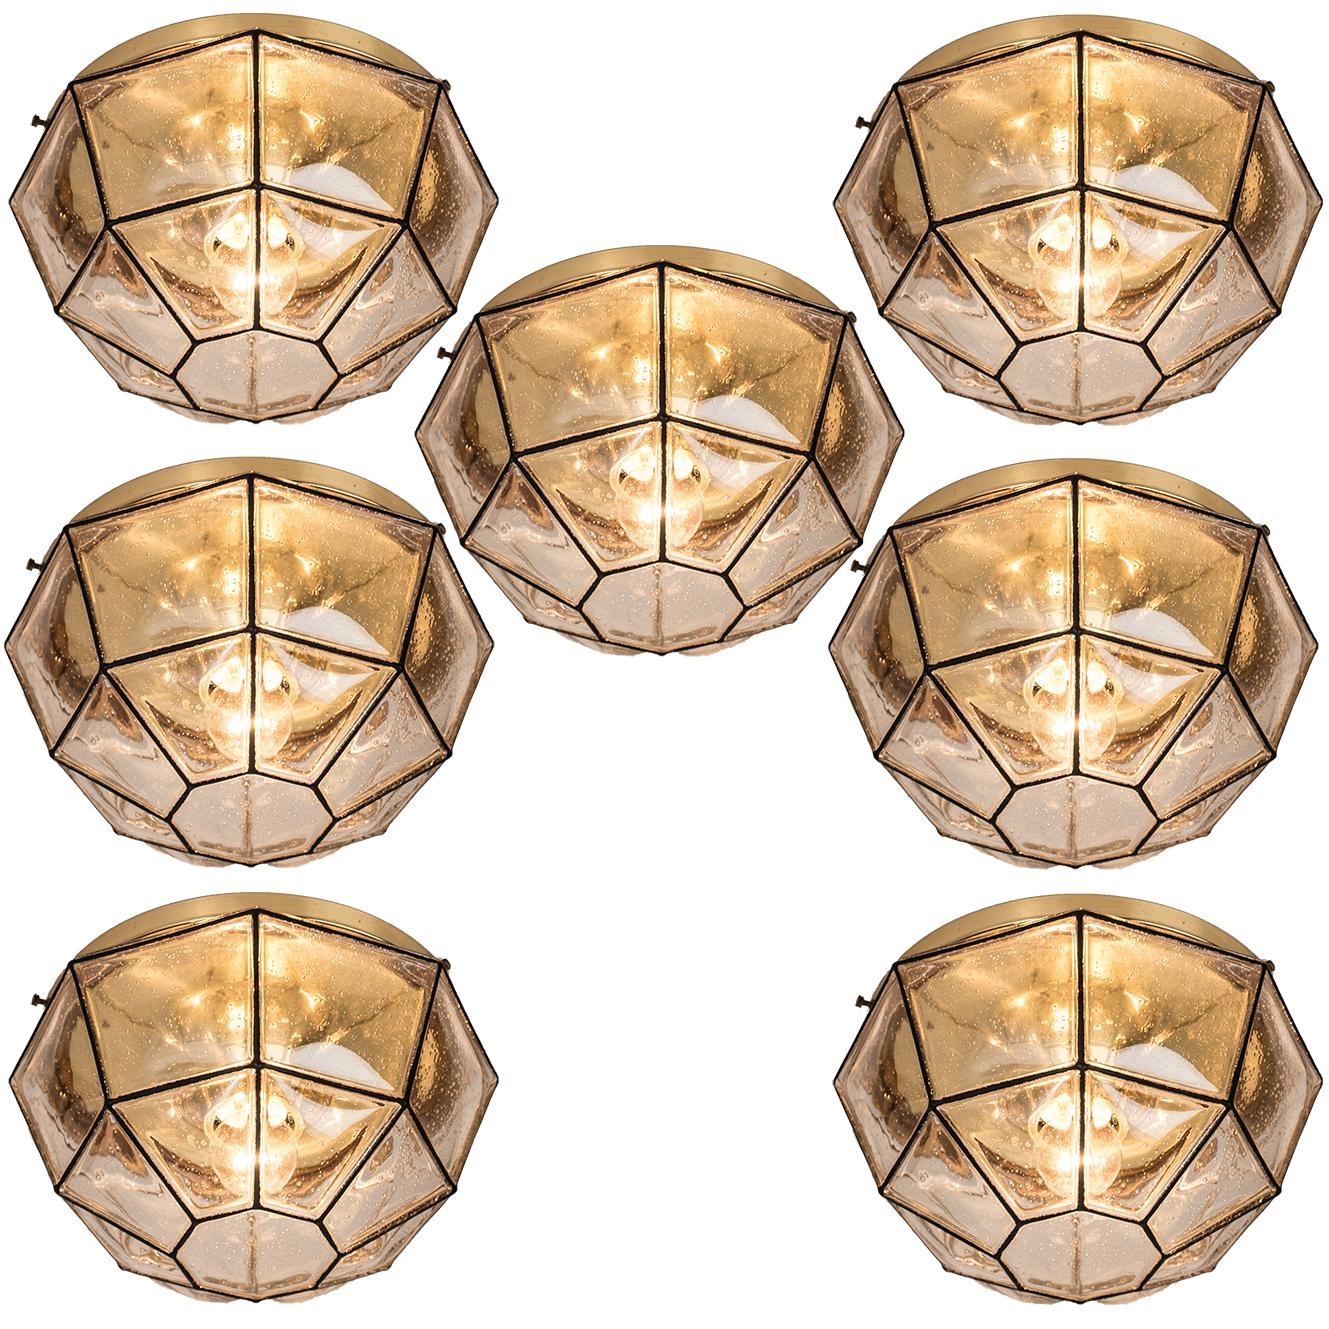 This beautiful and unique octagonal set of glass light flush mounts or wall lights were manufactured by Glashütte Limburg in Germany during the 1960s (late 1960s or early 1970s). Nice craftsmanship. Elaborate clear bubble glass which bulges slightly